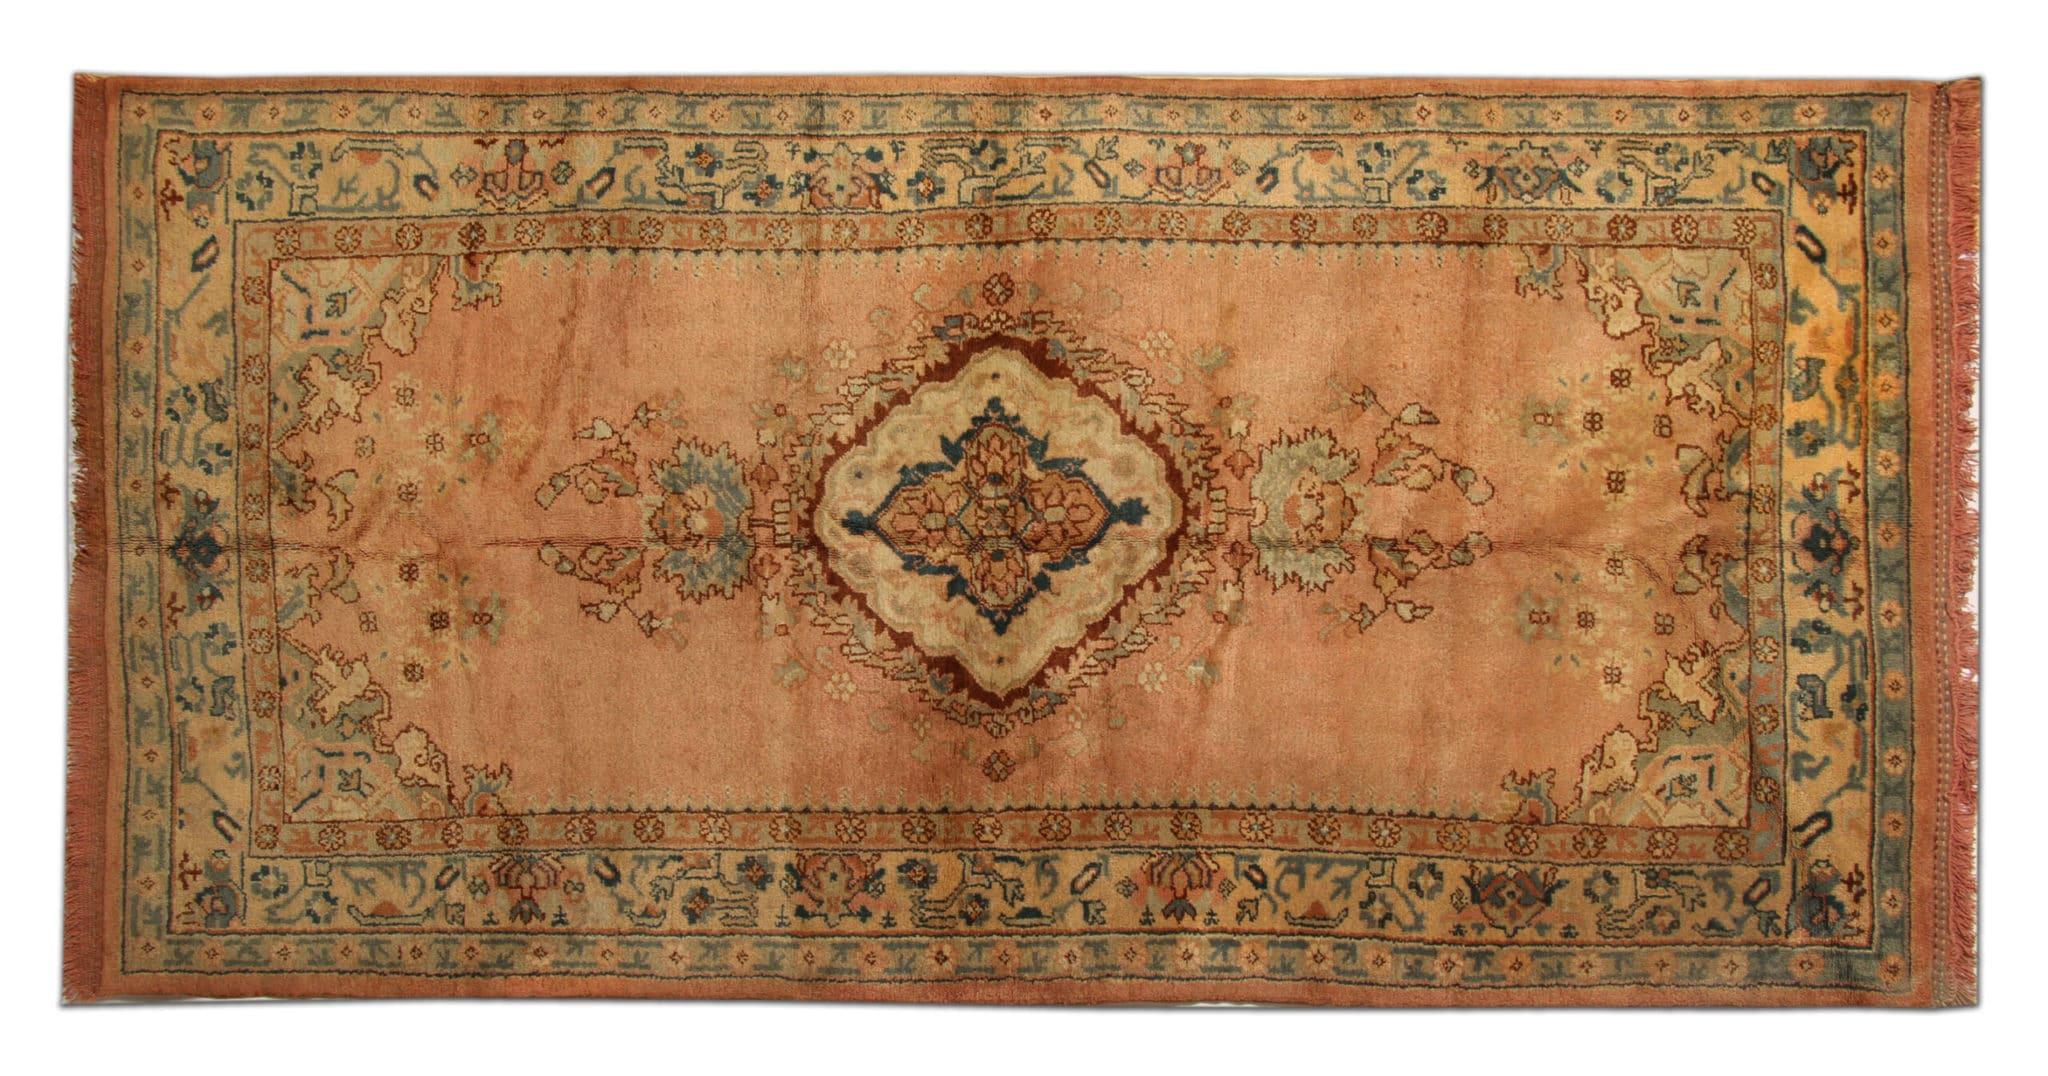 Introducing our exquisite antique rug, a timeless masterpiece that exudes elegance and heritage. Hand-knotted with precision and care, this rug carries the legacy of expert craftsmanship, dating back to the 1920s. Its dimensions of 305x150cm make it